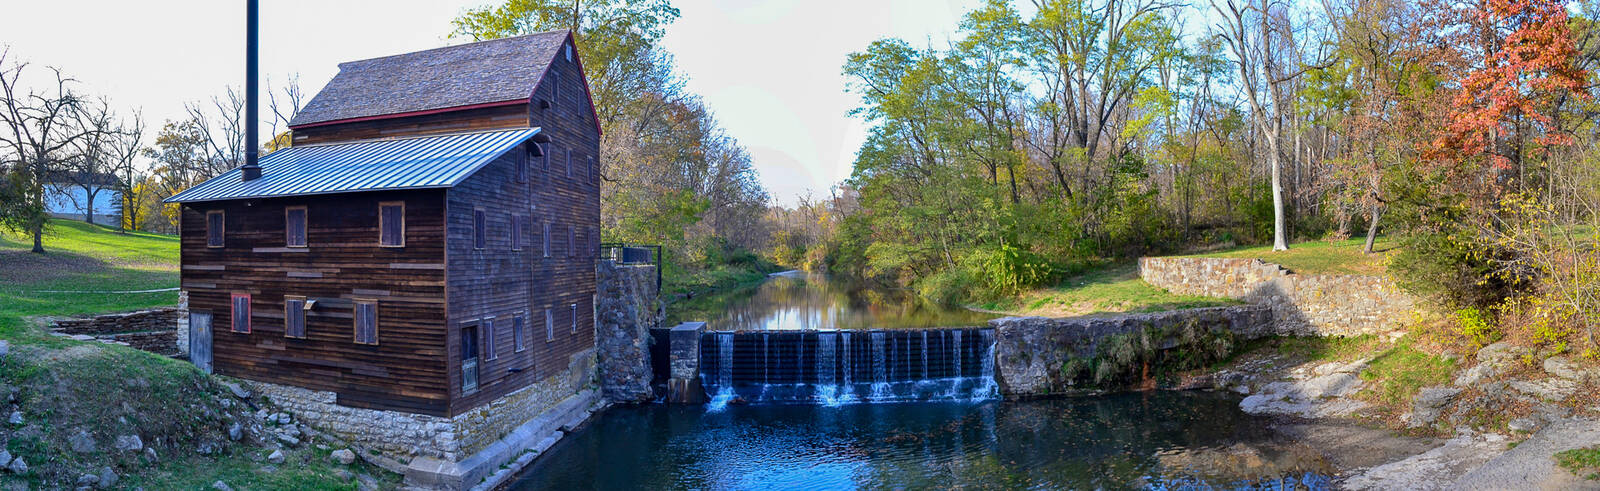 Image of Wild Cat Den State Park Grist Mill by John Johnson